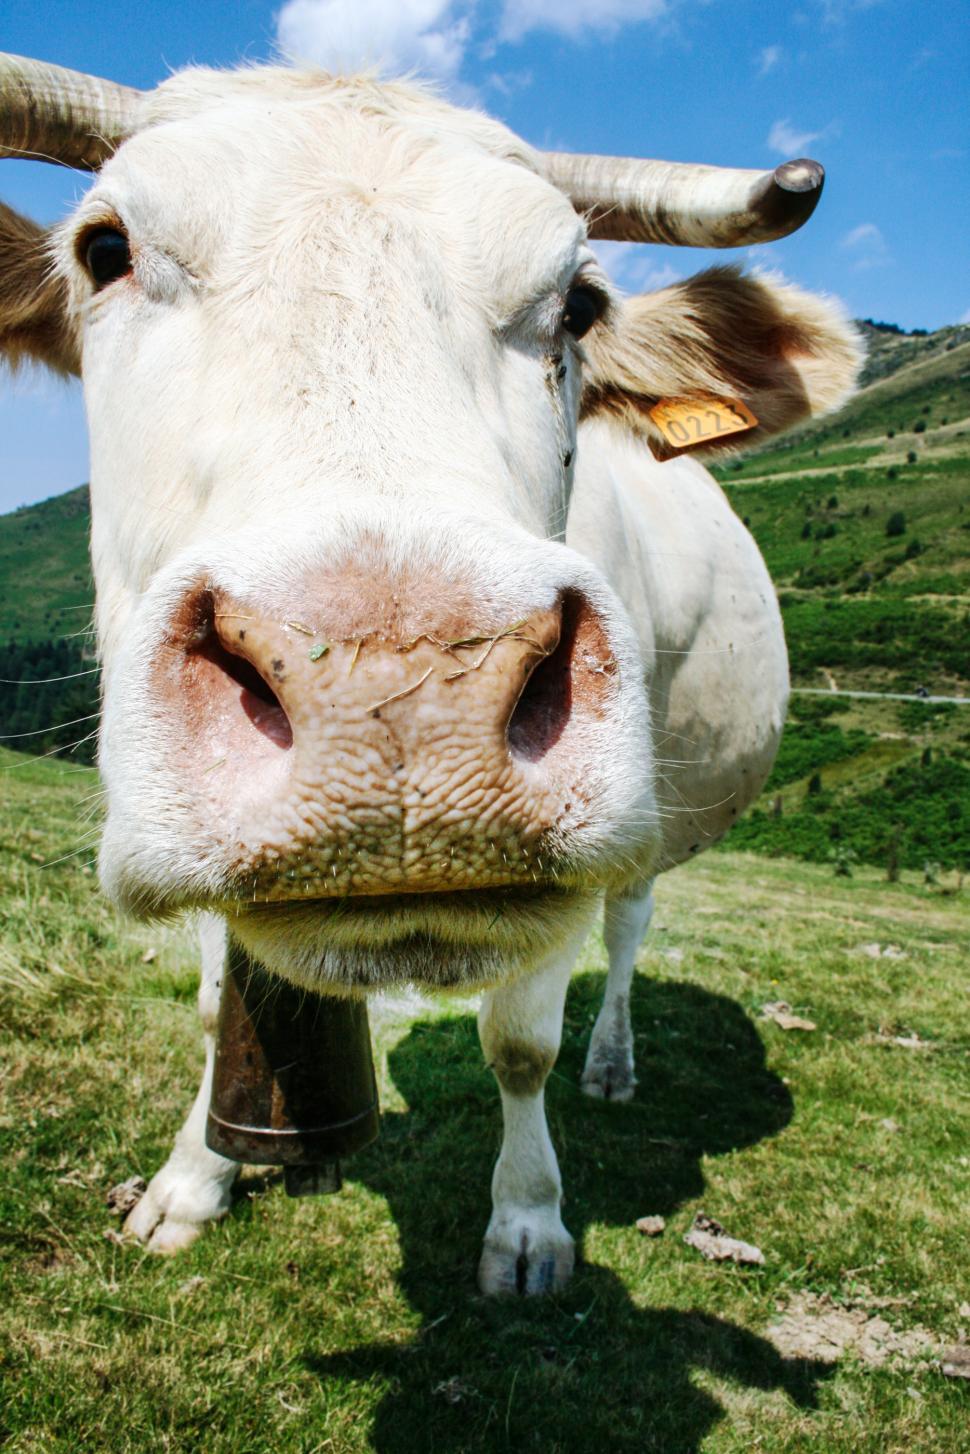 Free Image of The Cow on grass 